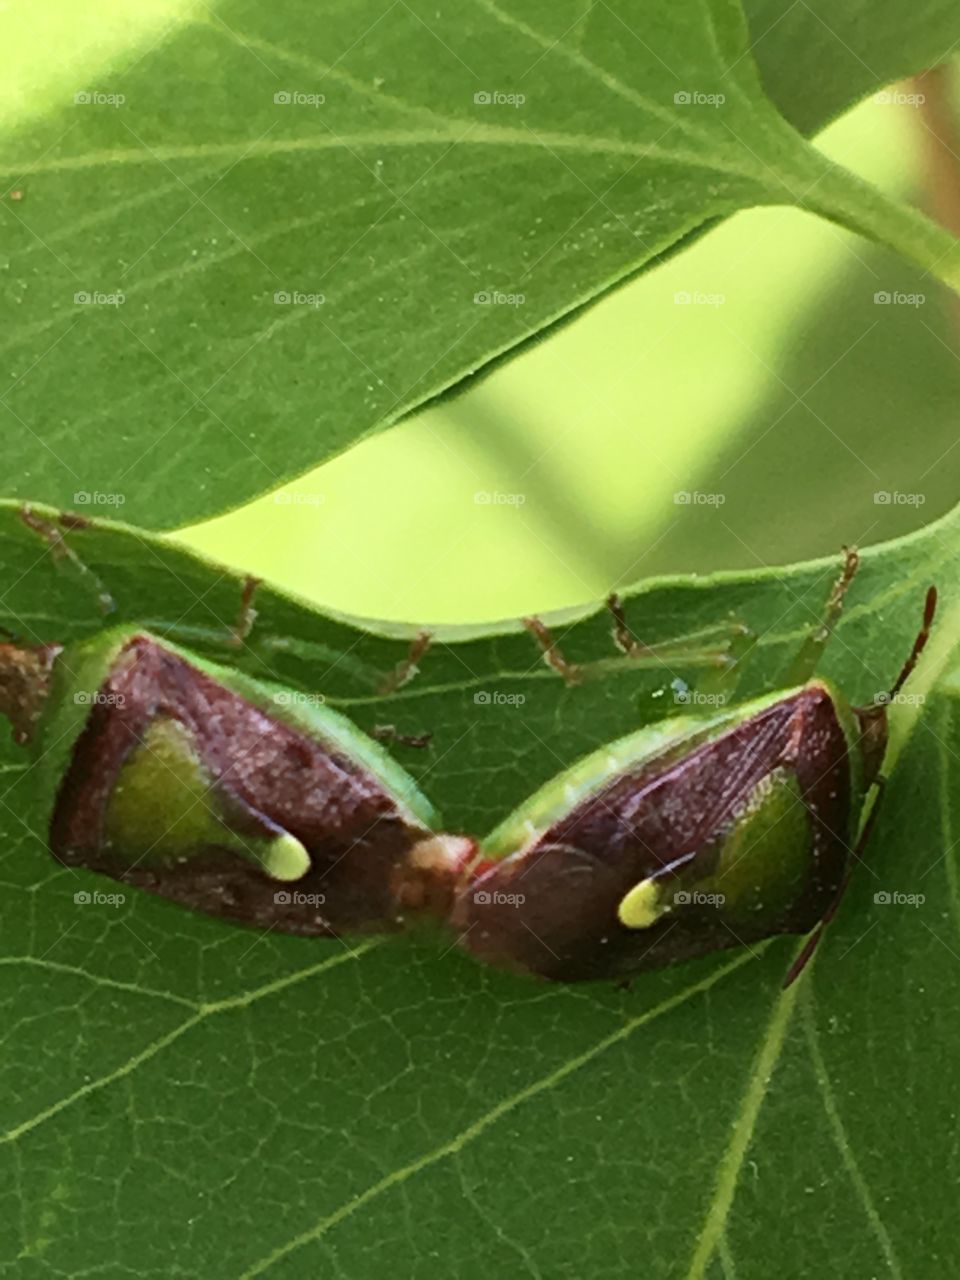 Mating Insects 